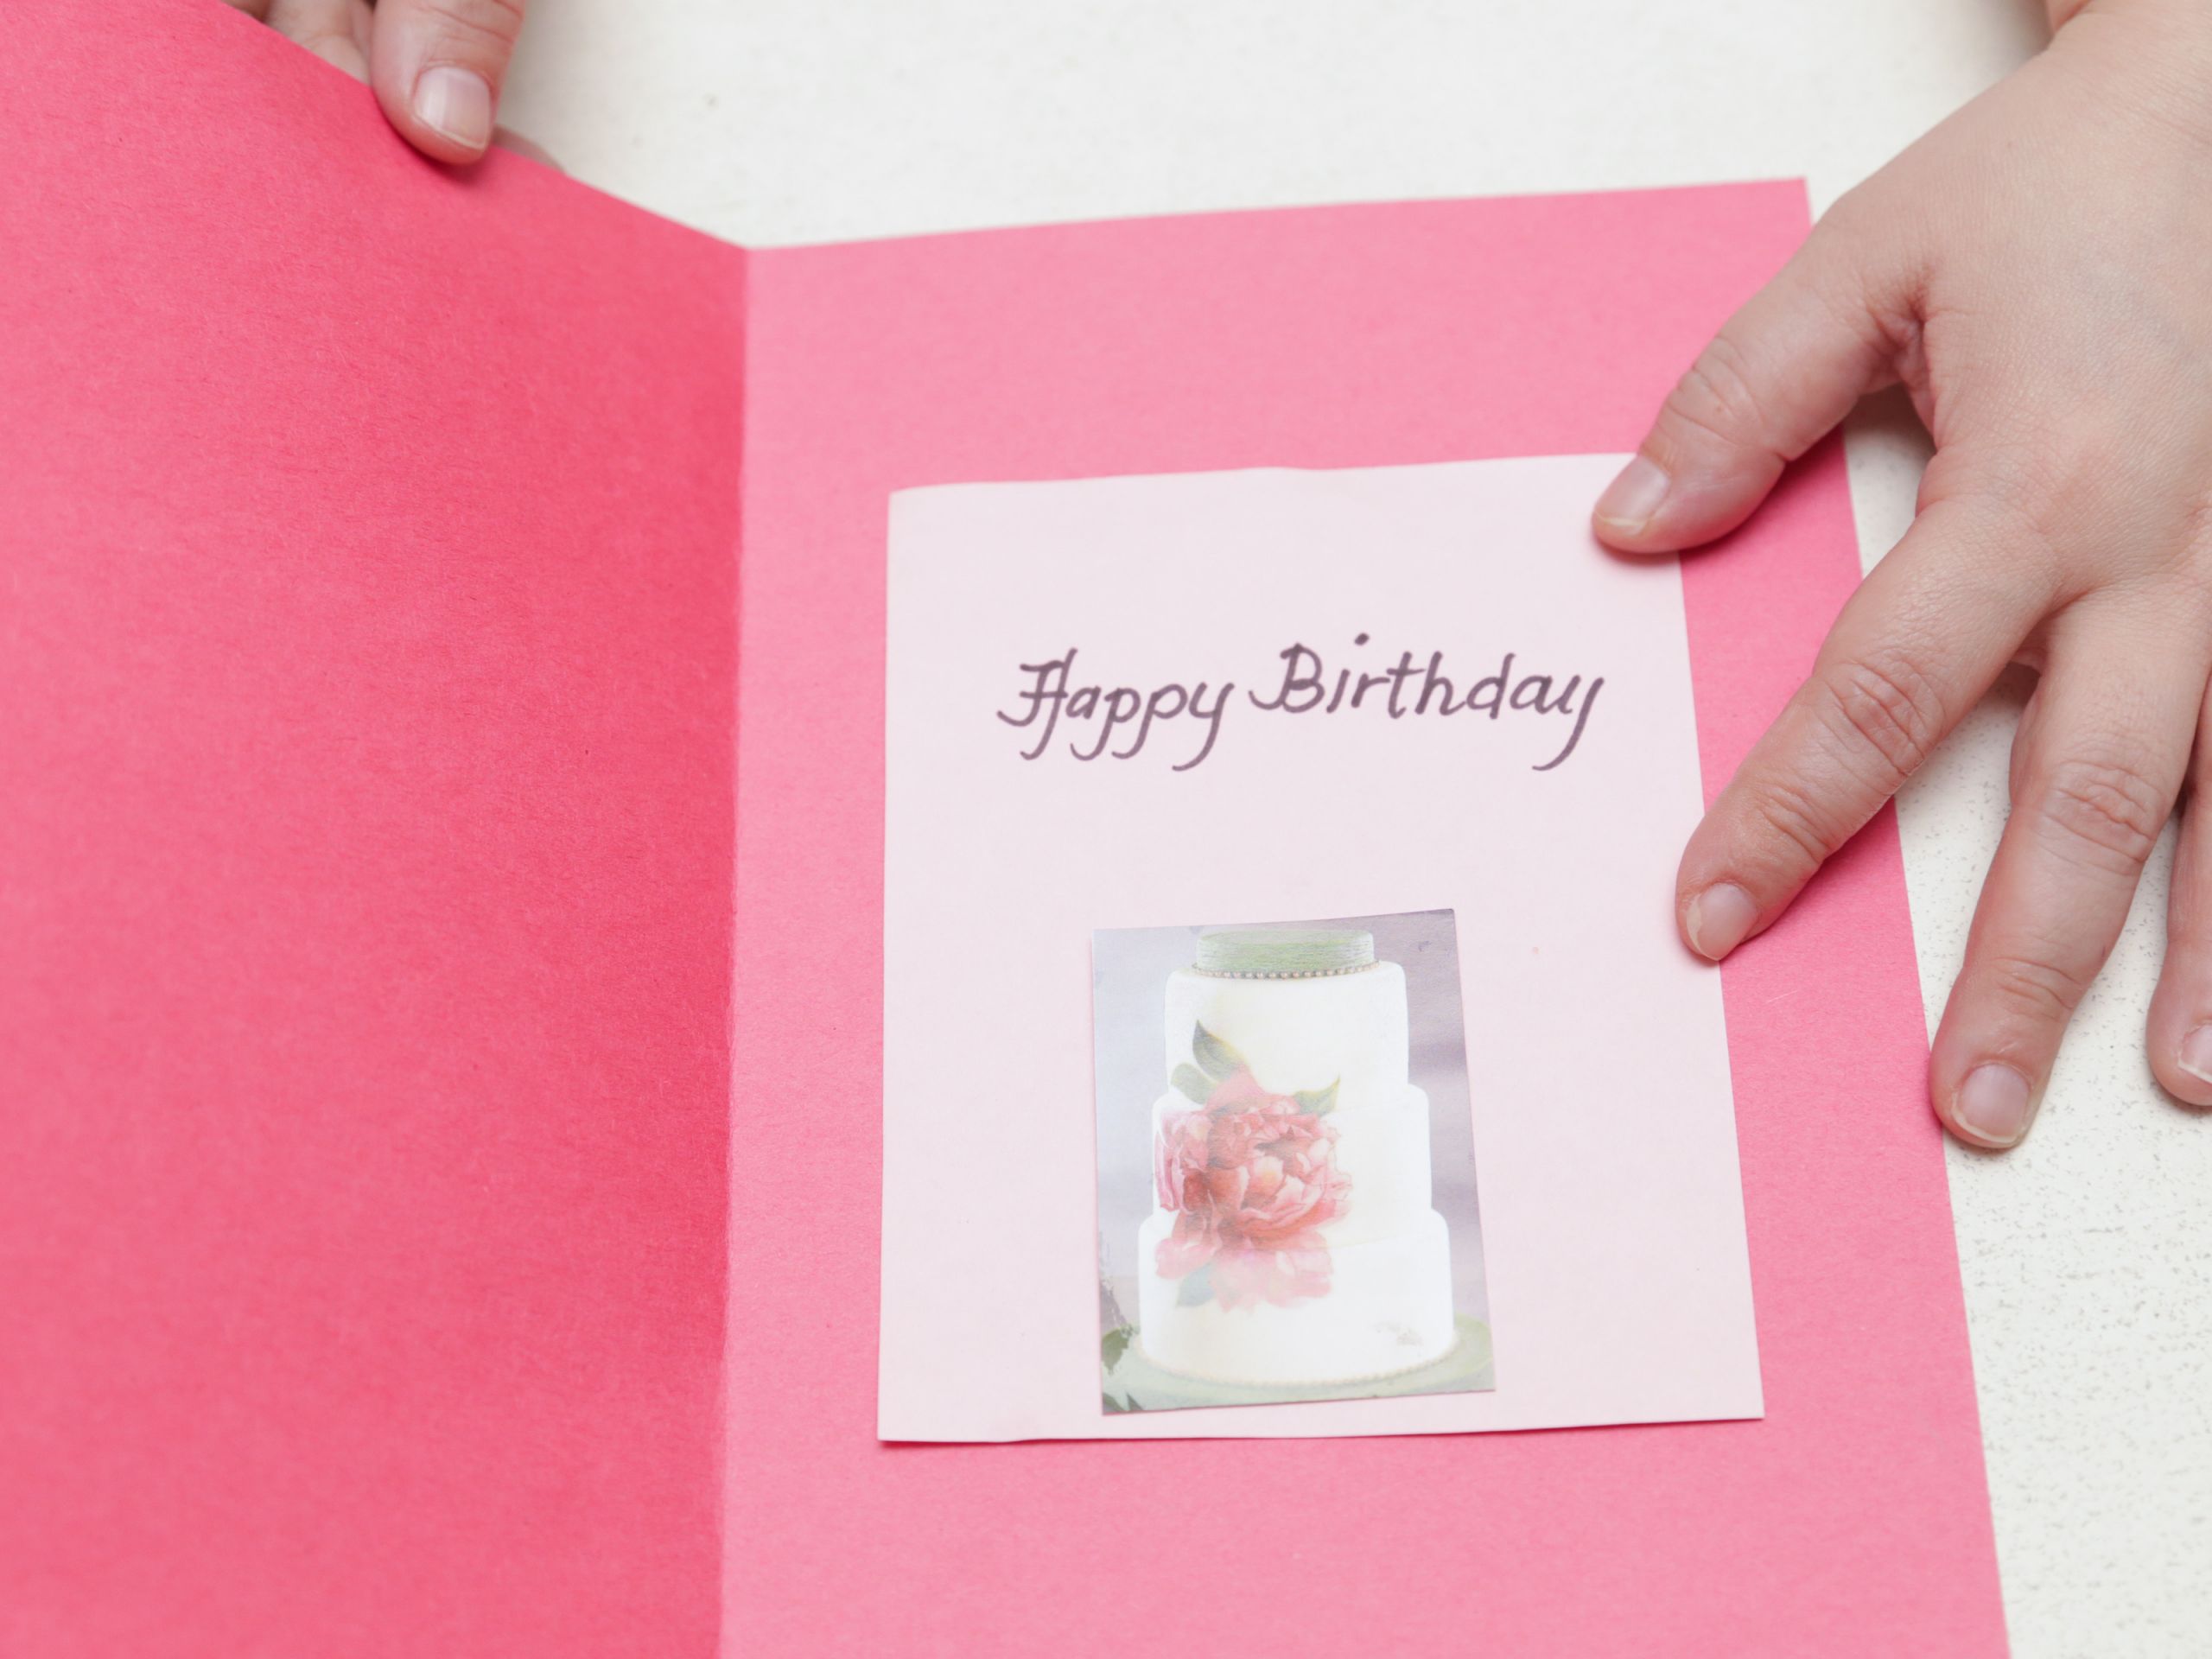 Make A Birthday Card
 4 Ways to Make a Simple Birthday Card at Home wikiHow